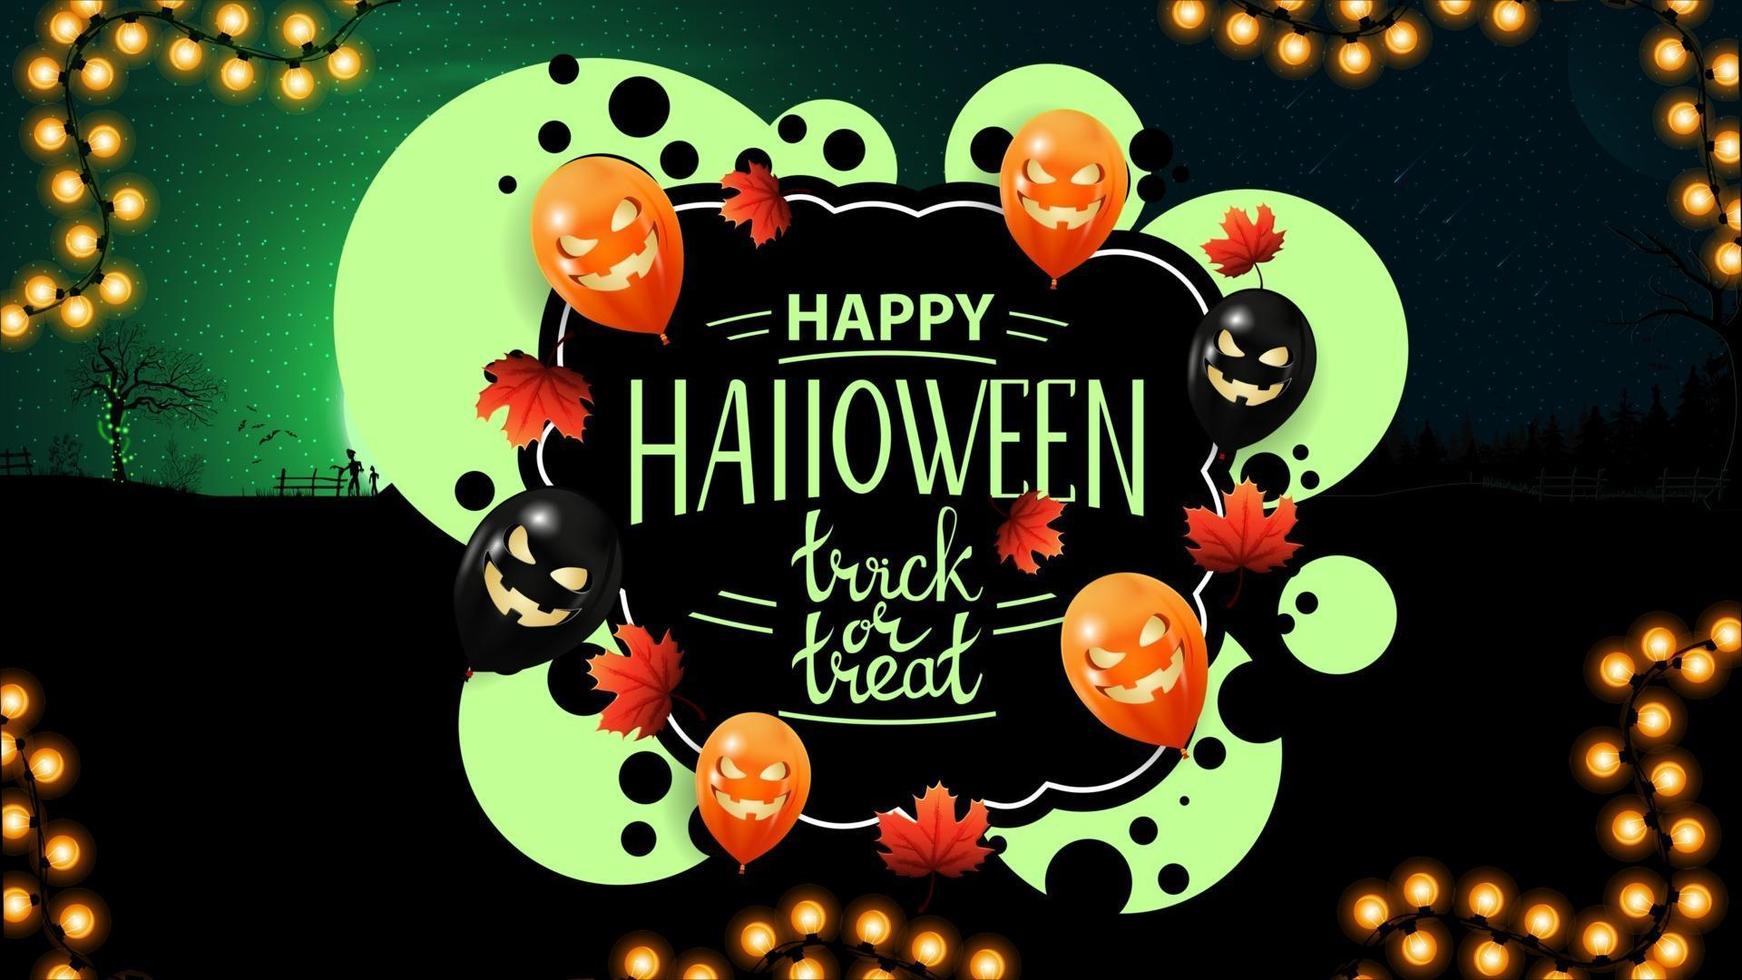 Happy Halloween, trick or treat, creative greeting postcard with graffiti style and Halloween background. Template with bubbles, autumn leafs and Halloween balloons vector